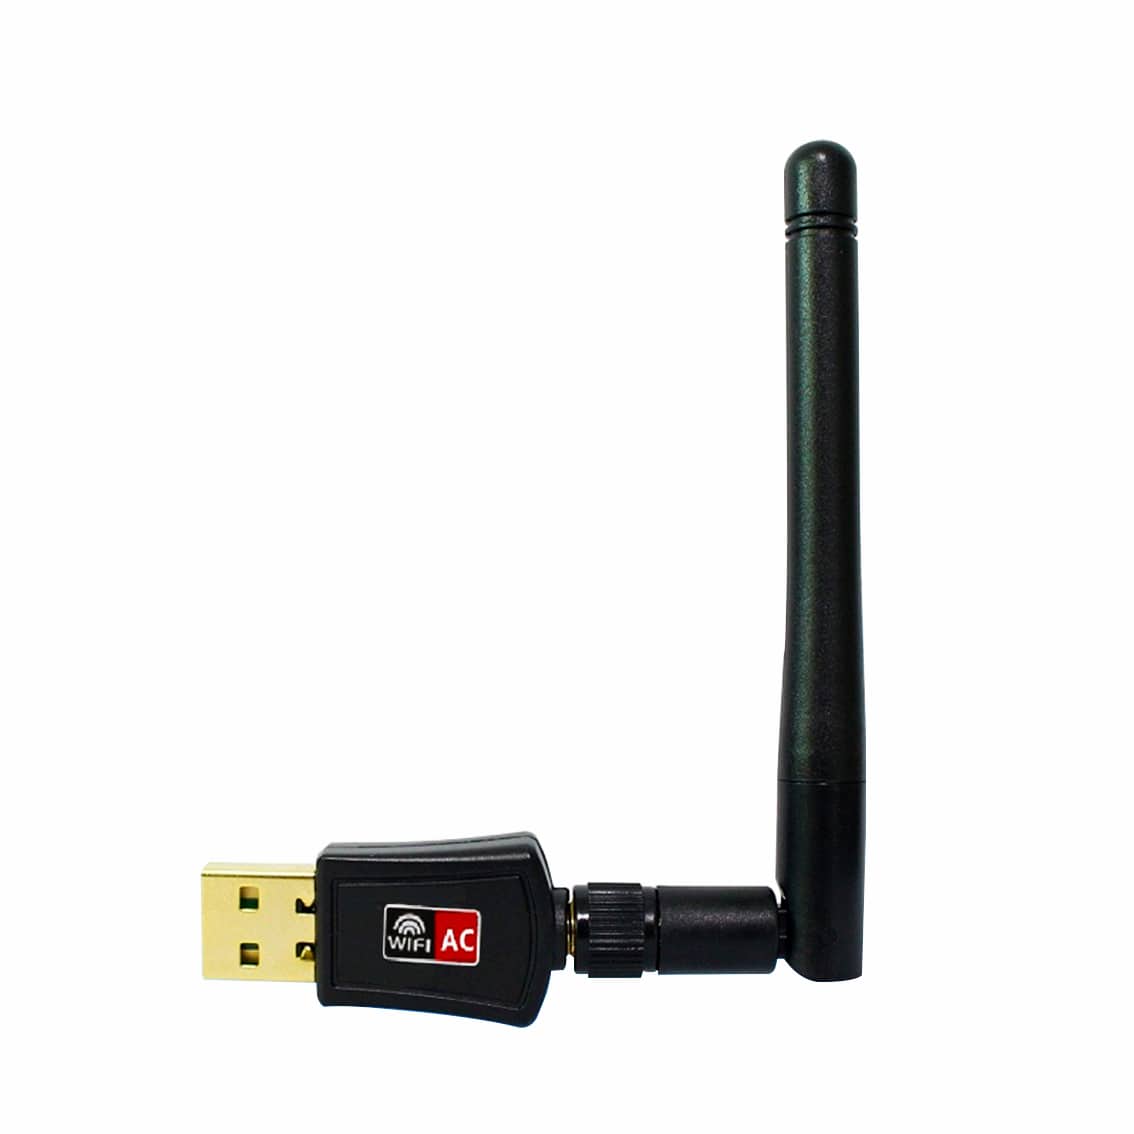 High-performance Dual-Band Wi-Fi Adapter with Long Range Antenna for PC/Laptop